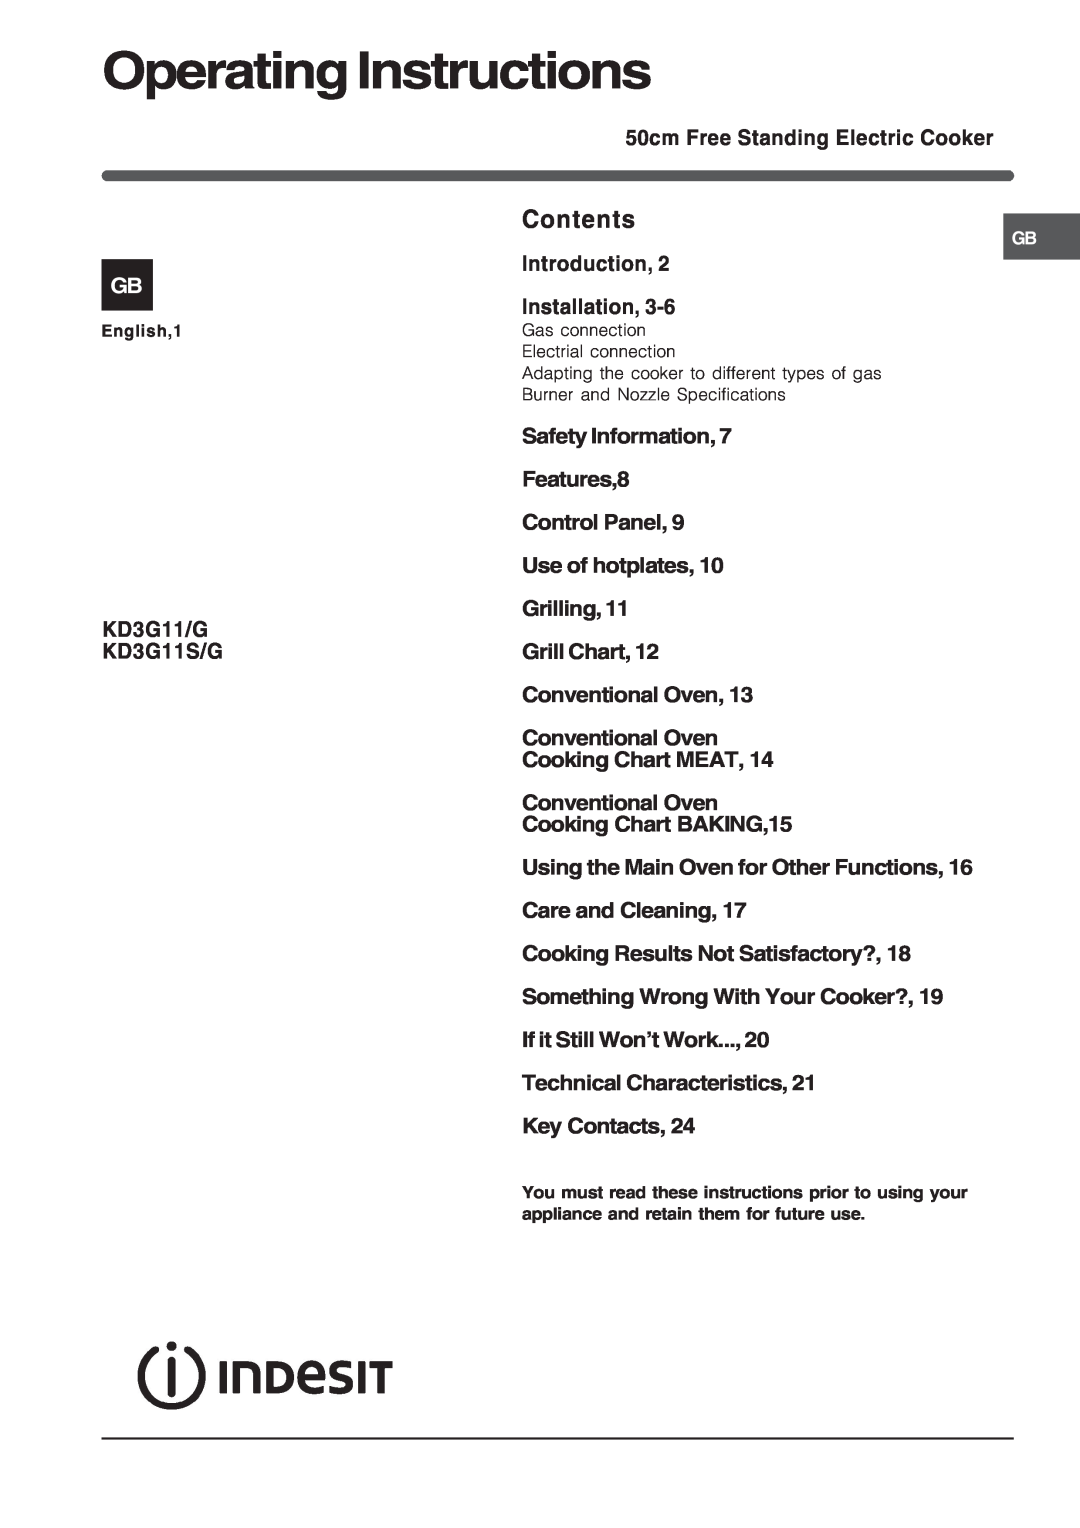 Indesit KD3G11S/G manual Operating Instructions, Contents 